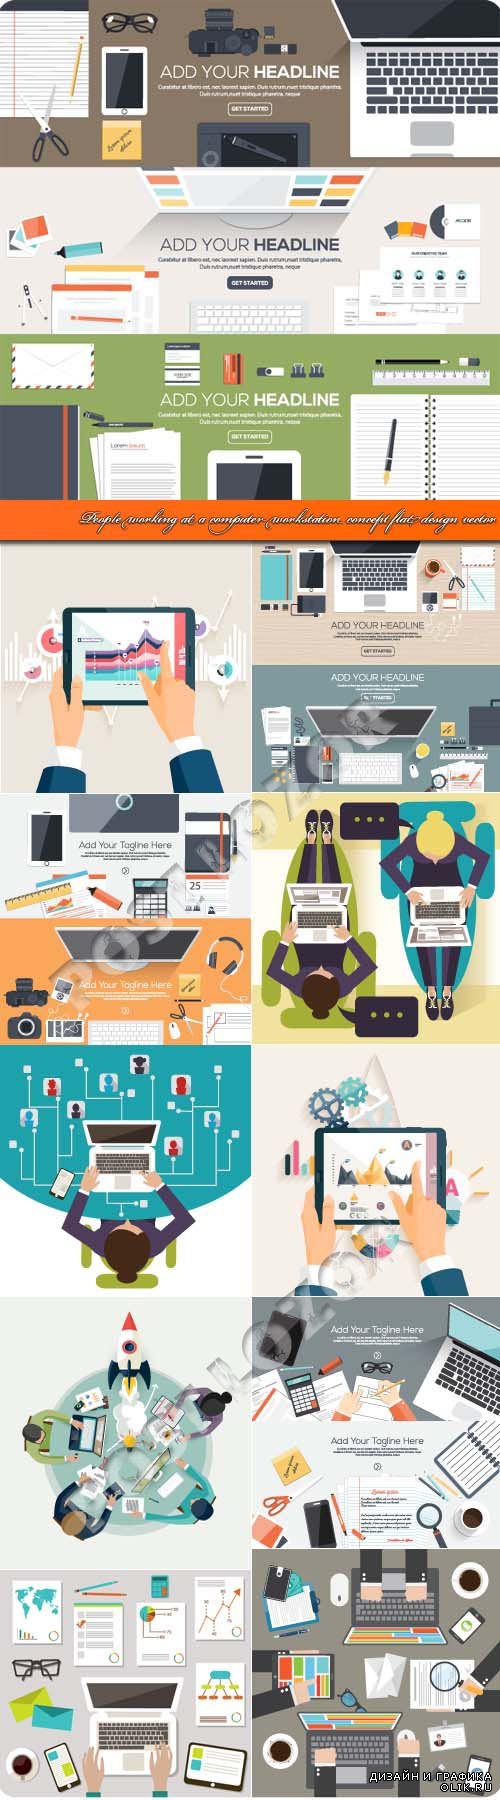 People working at computer workstation concept flat design vector